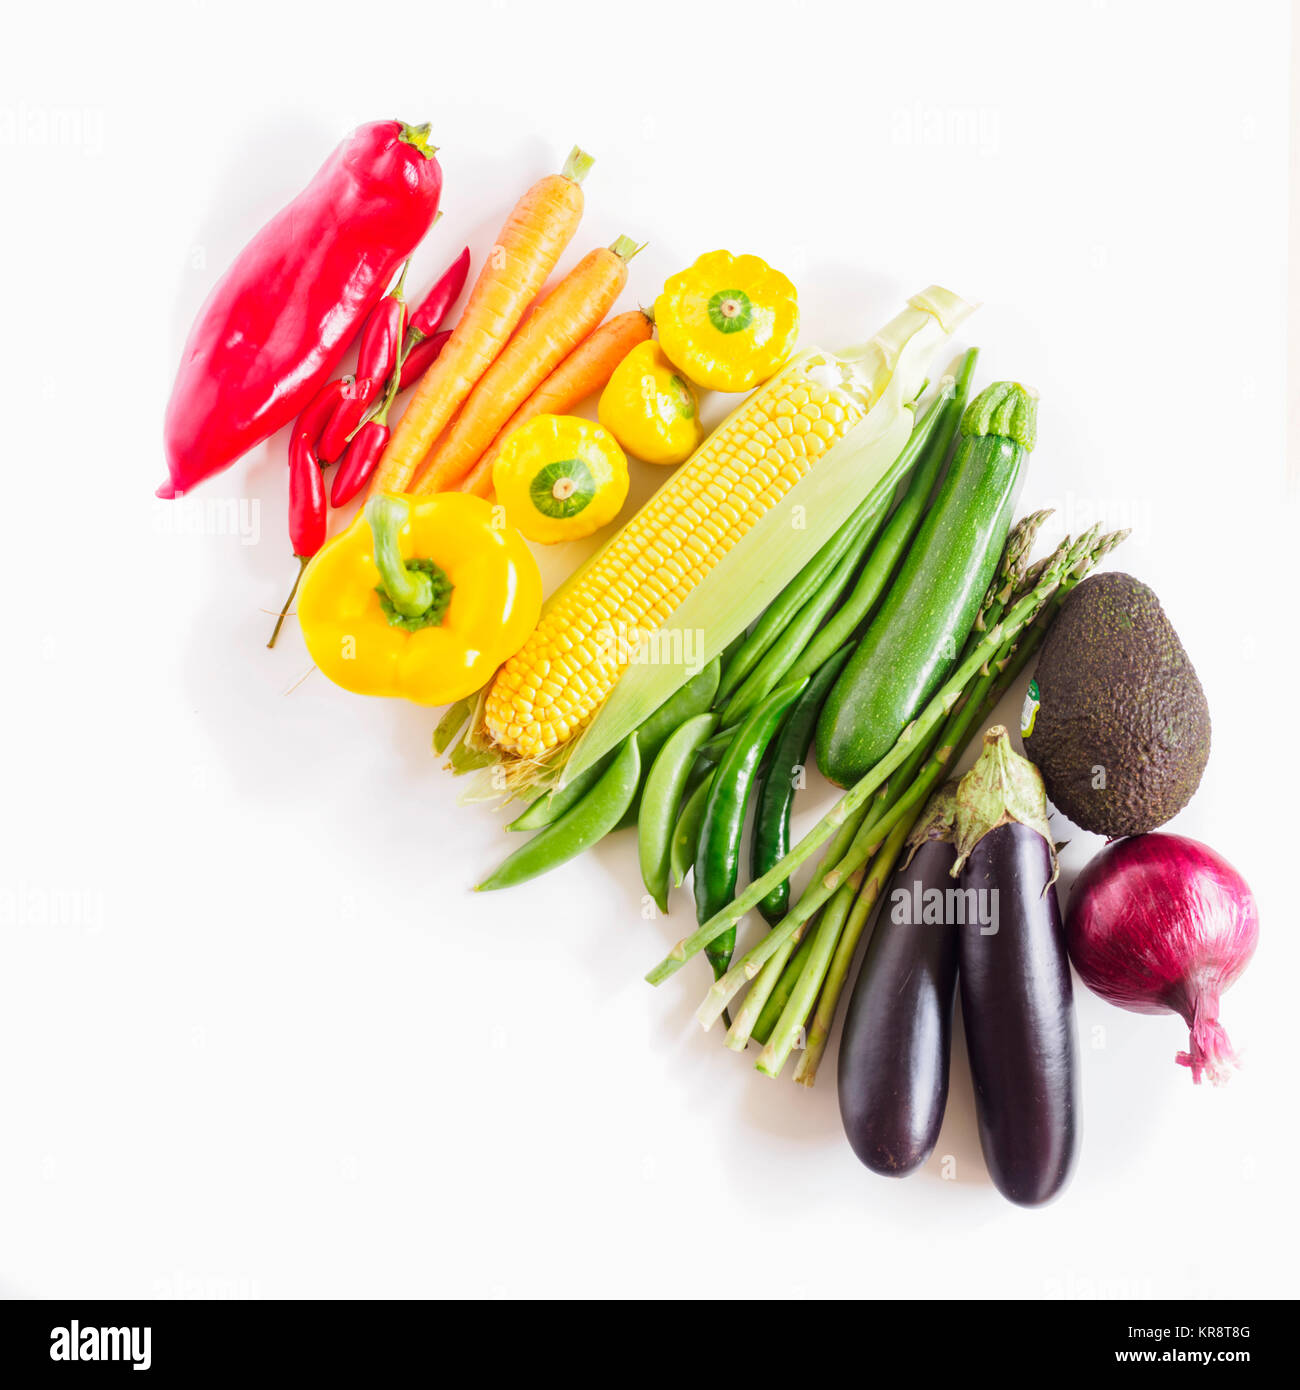 Composition of multicolored vegetables Stock Photo